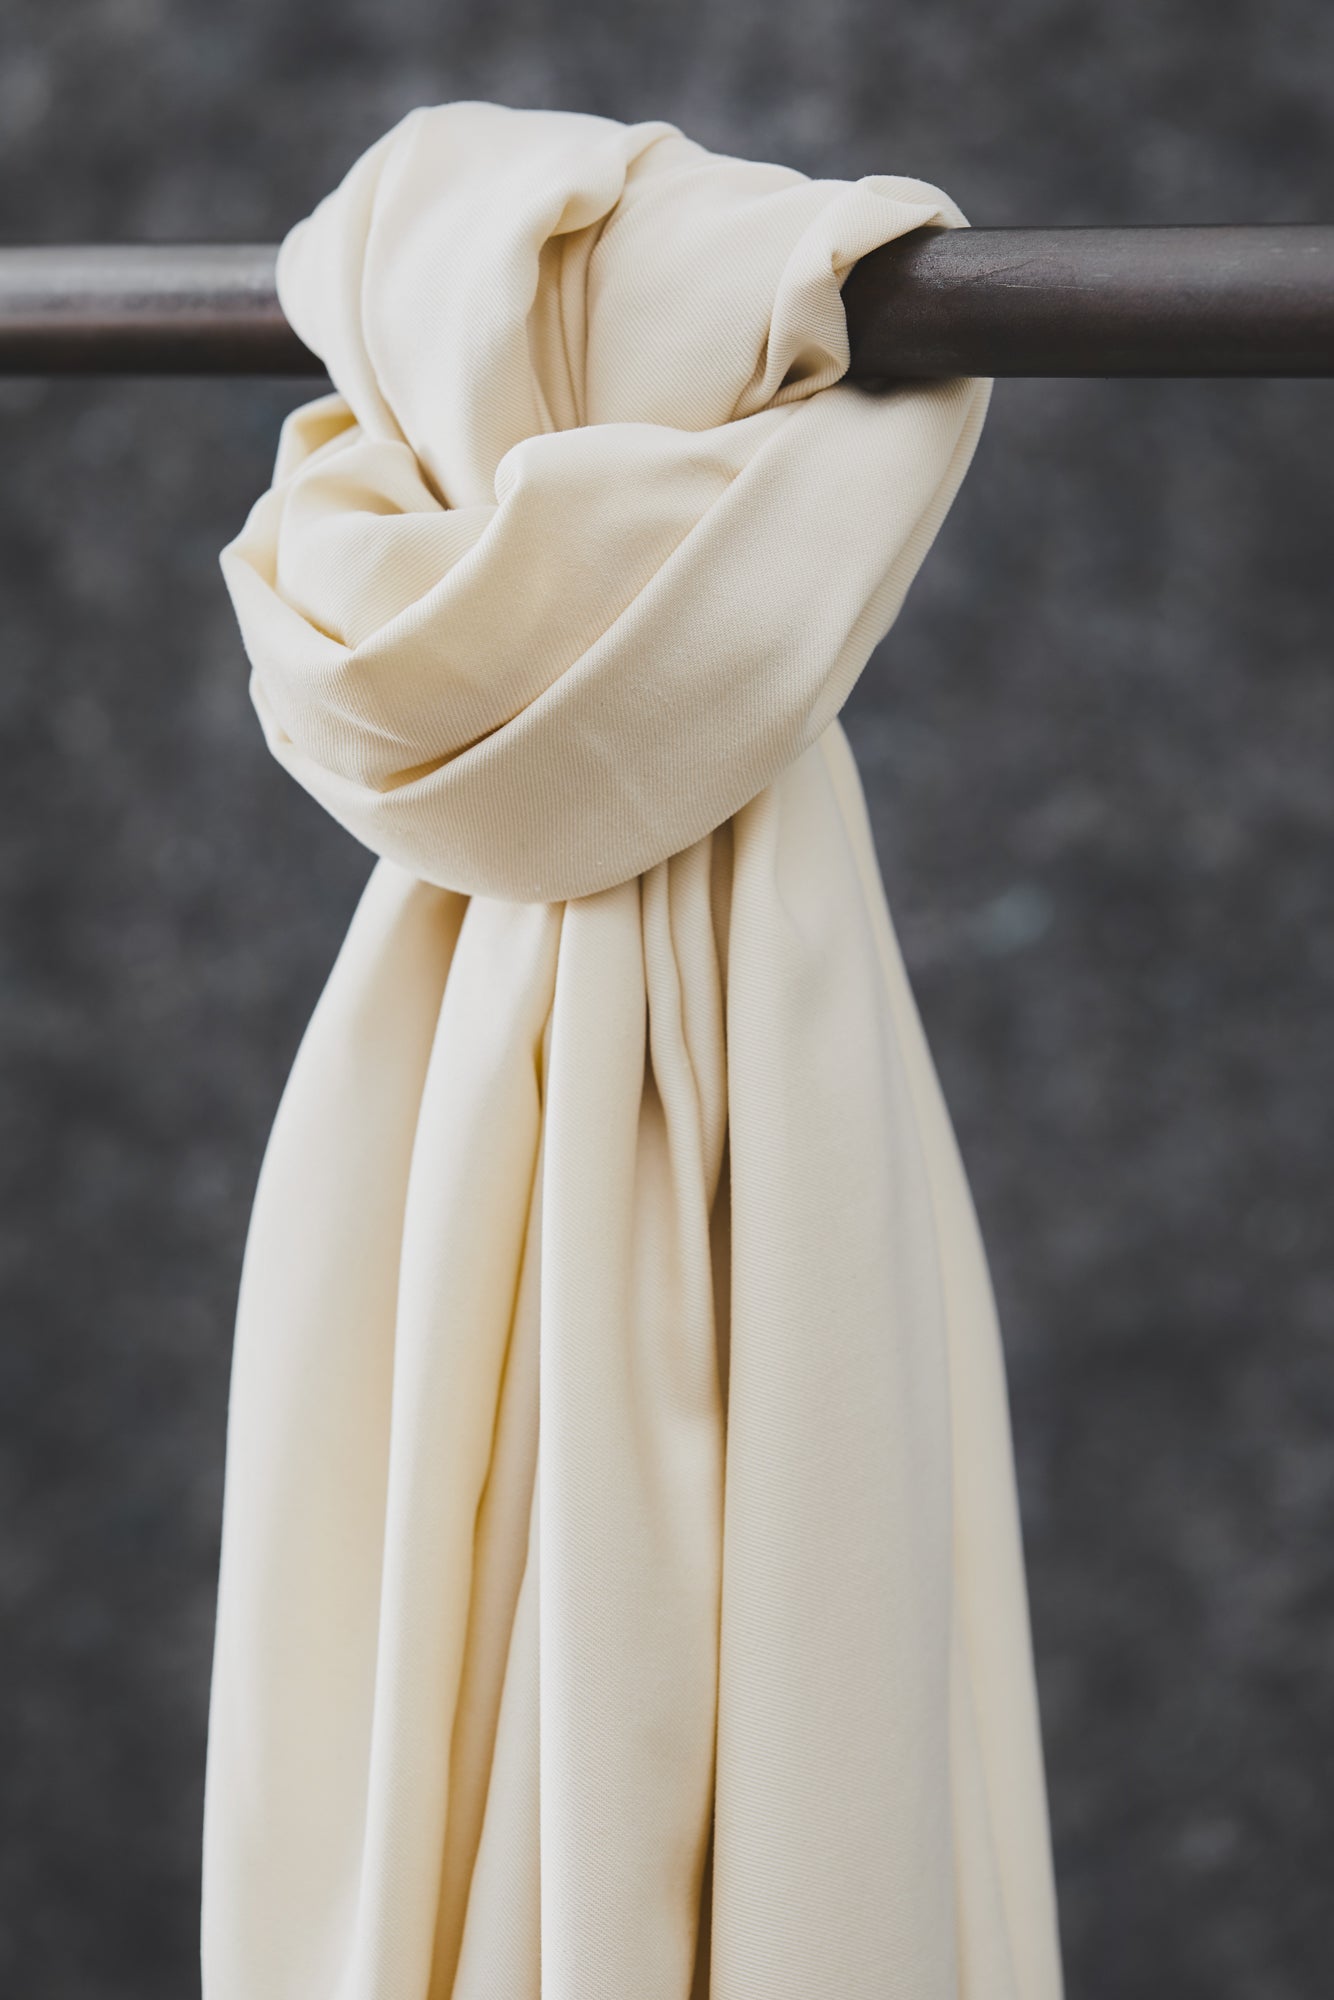 Smooth drape twill tencel sewing fabric knotted over clothes rail, in colour shell (cream)